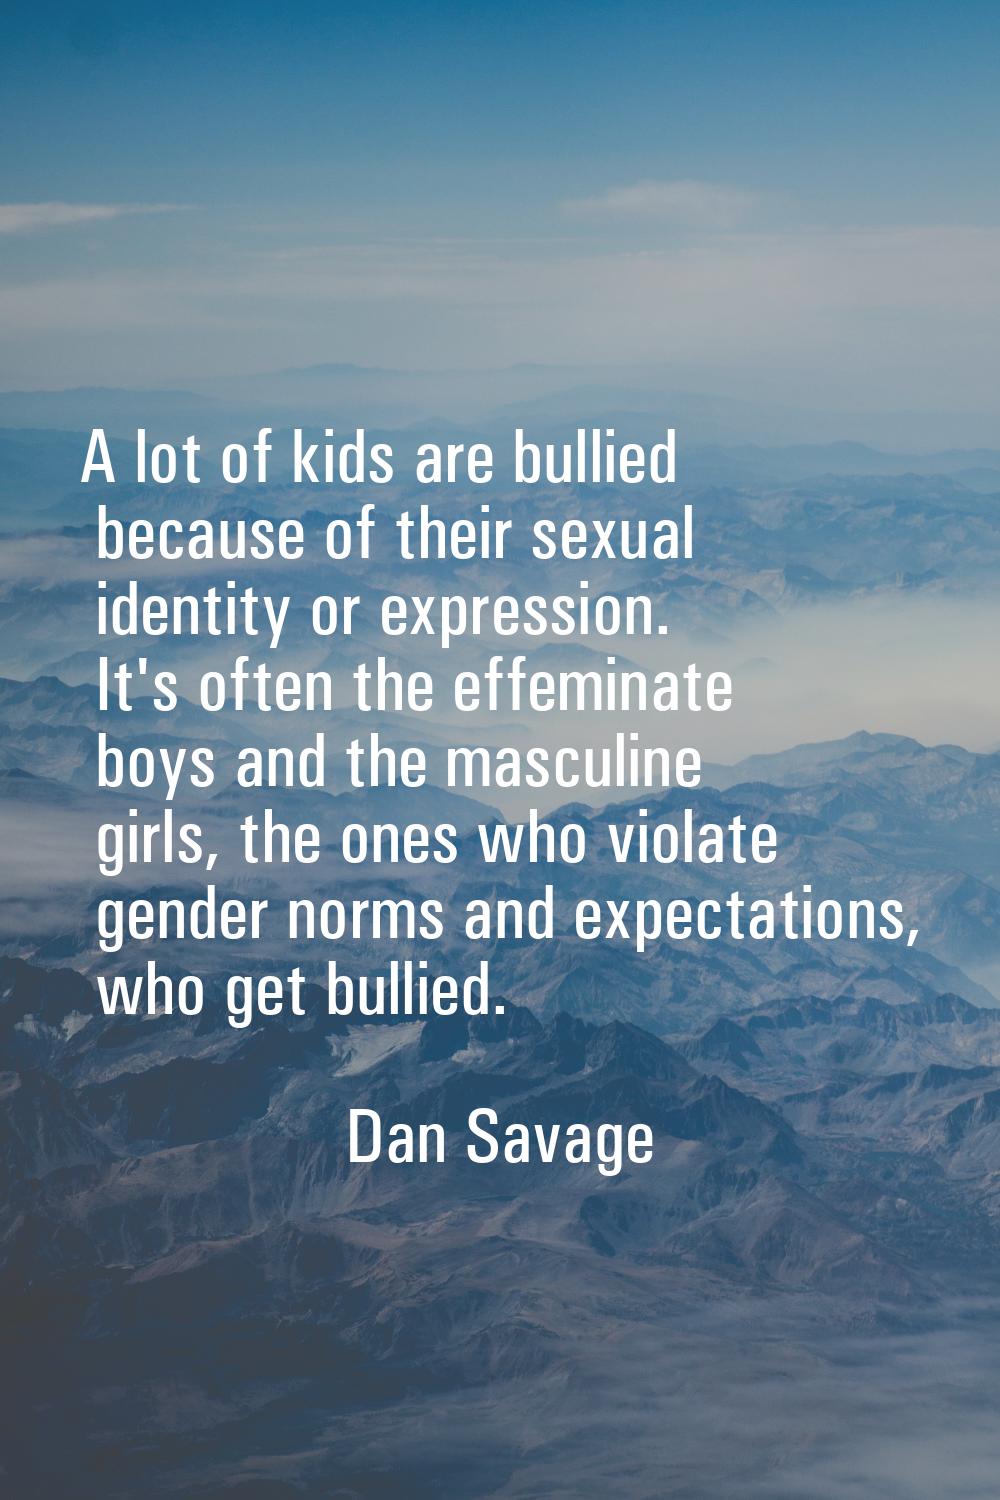 A lot of kids are bullied because of their sexual identity or expression. It's often the effeminate